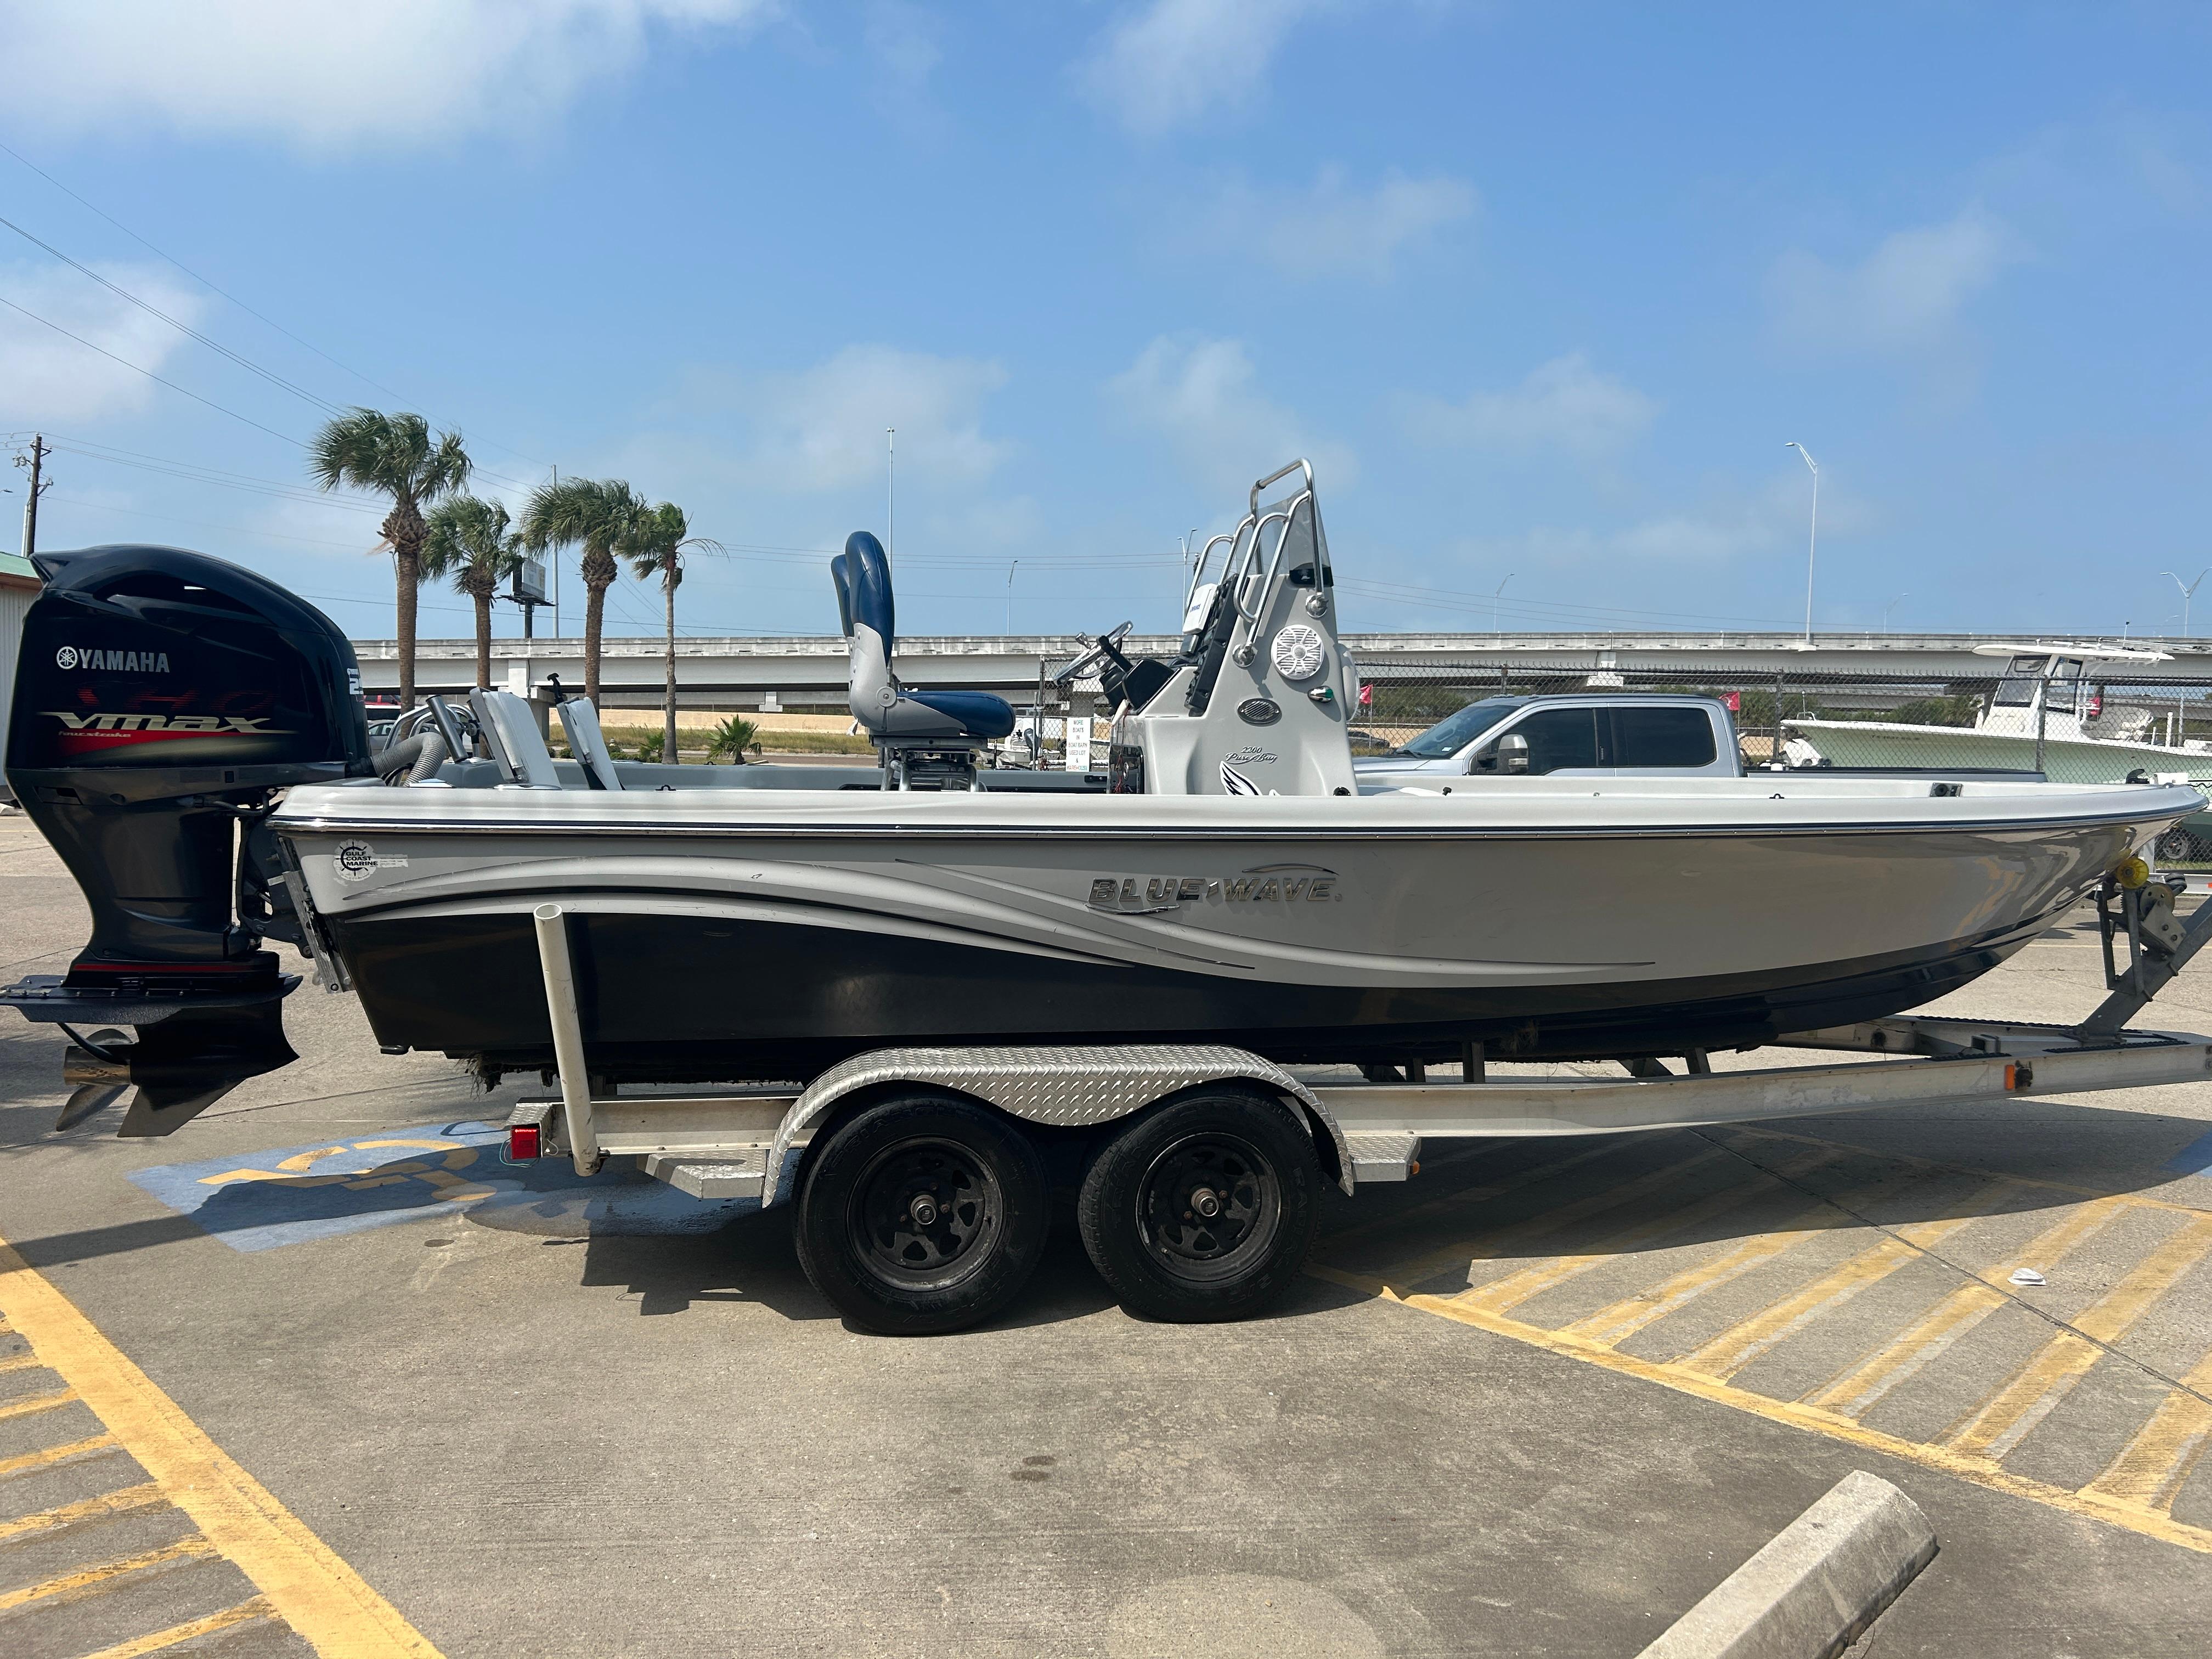 2013 Blue Wave Pure Bay 2200